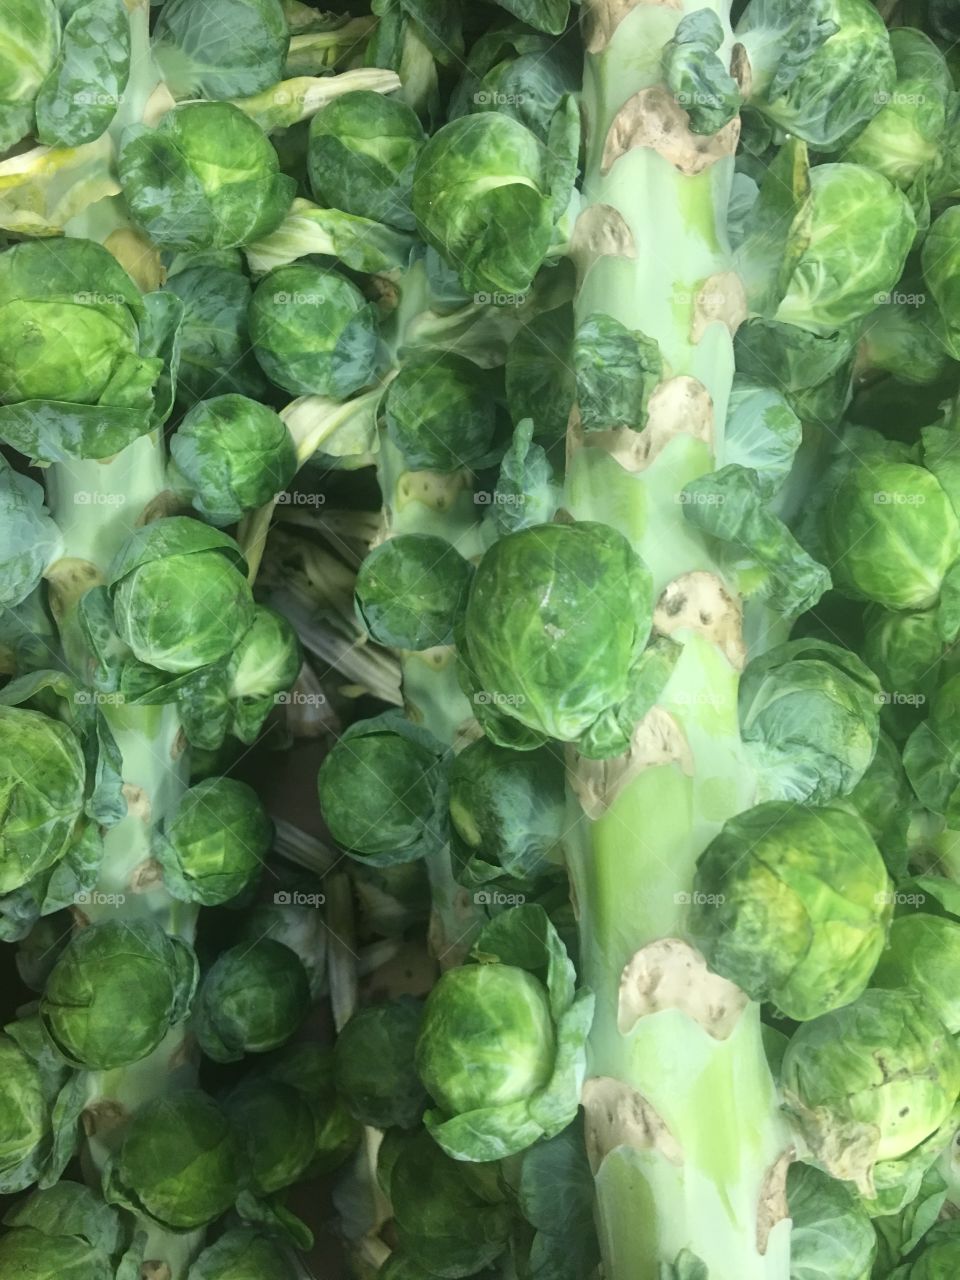 Brussels sprouts still on the stock